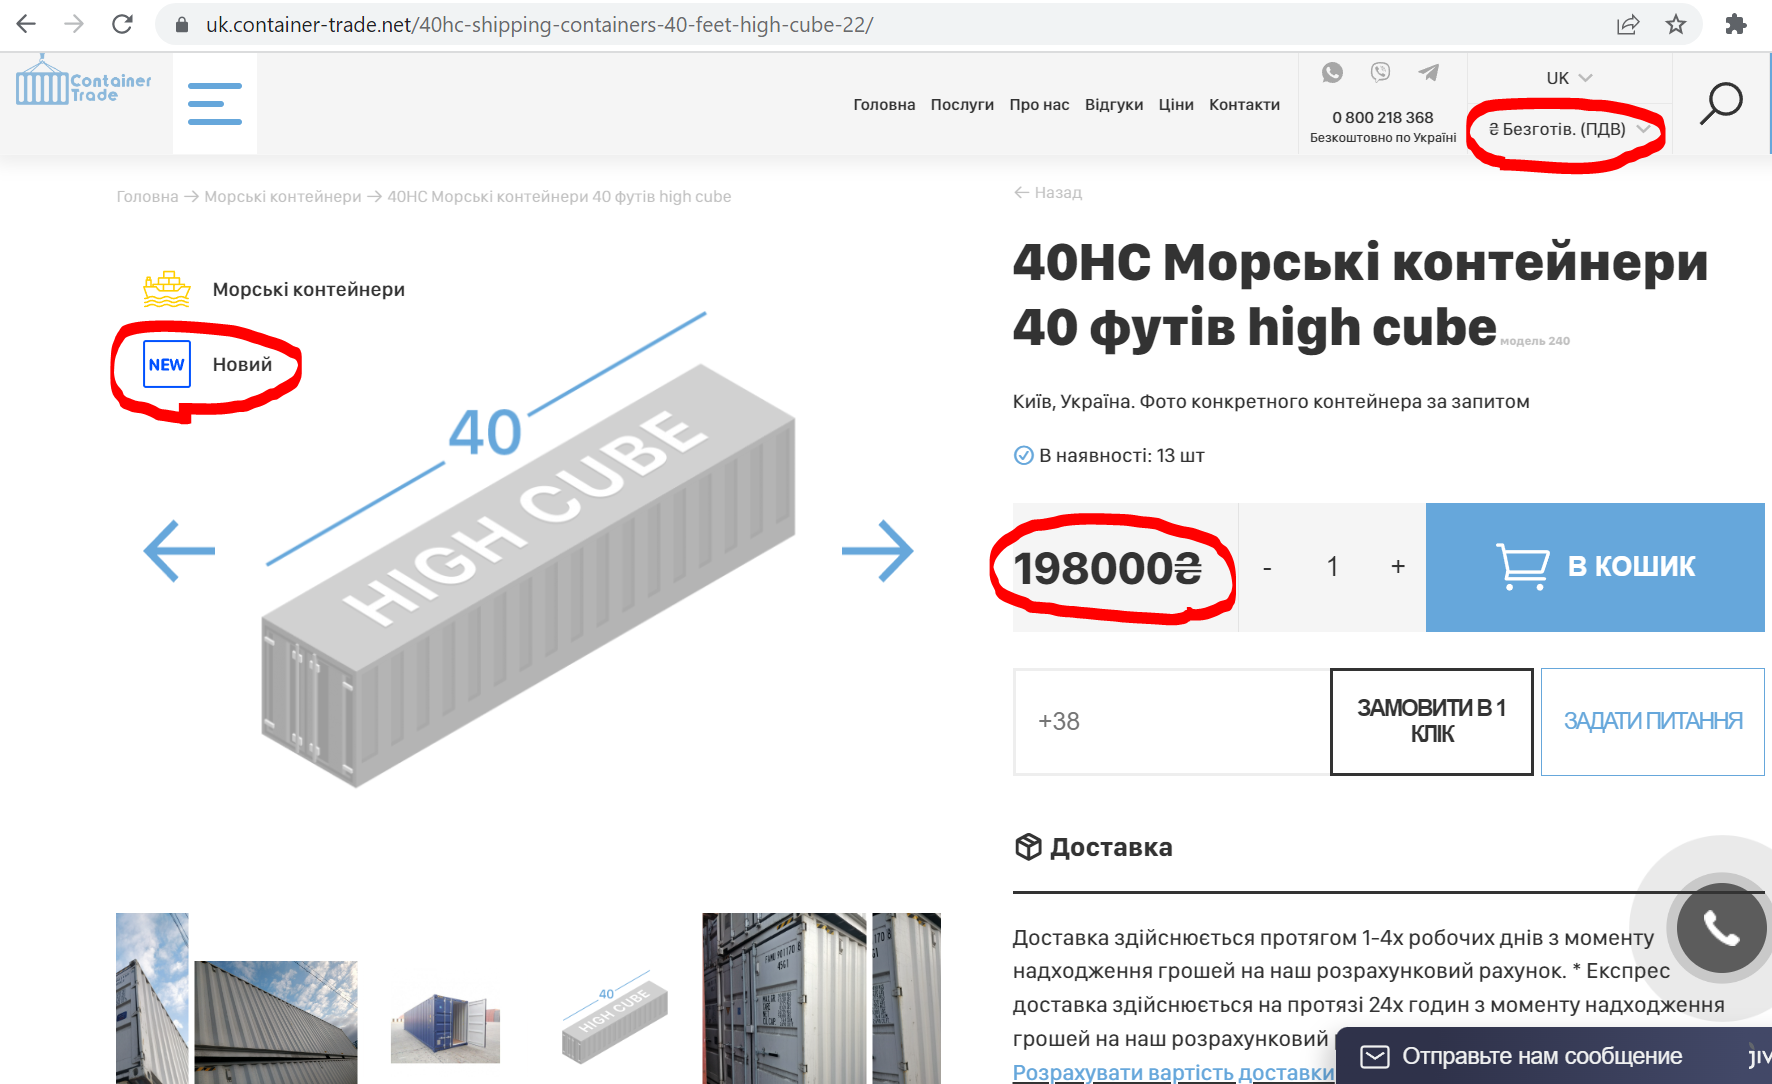 Poltavagazdobycha for 4 million ordered sea containers one and a half times more expensive